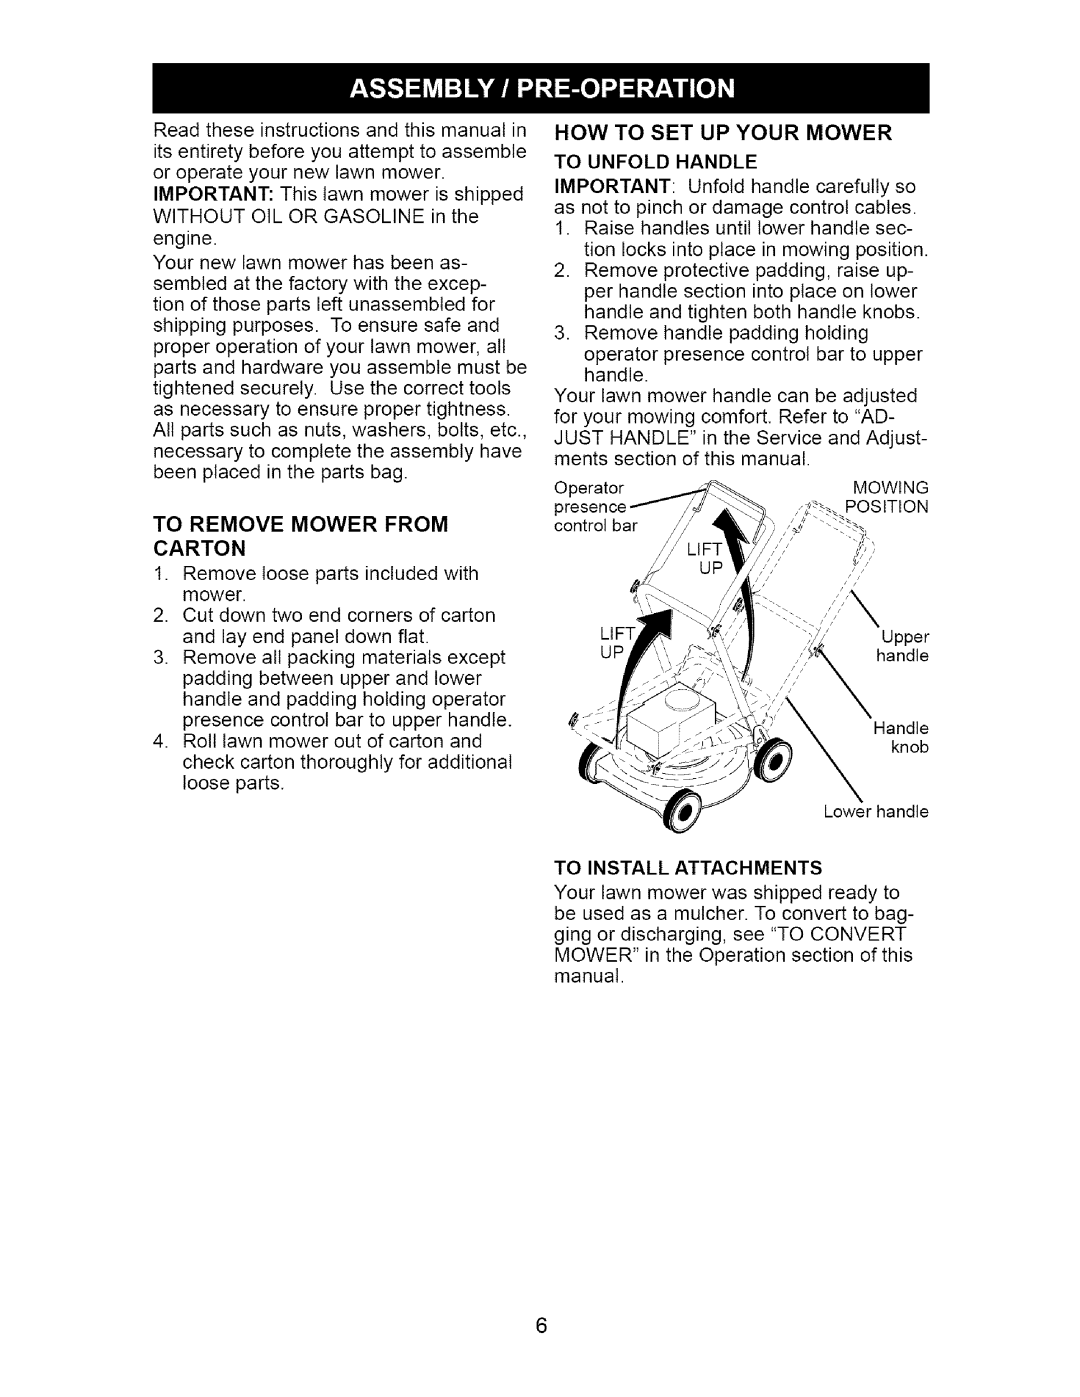 Craftsman 917.37134 owner manual How To Set Up Your Mower, Carton, To Unfold Handle, To Install Attachments 